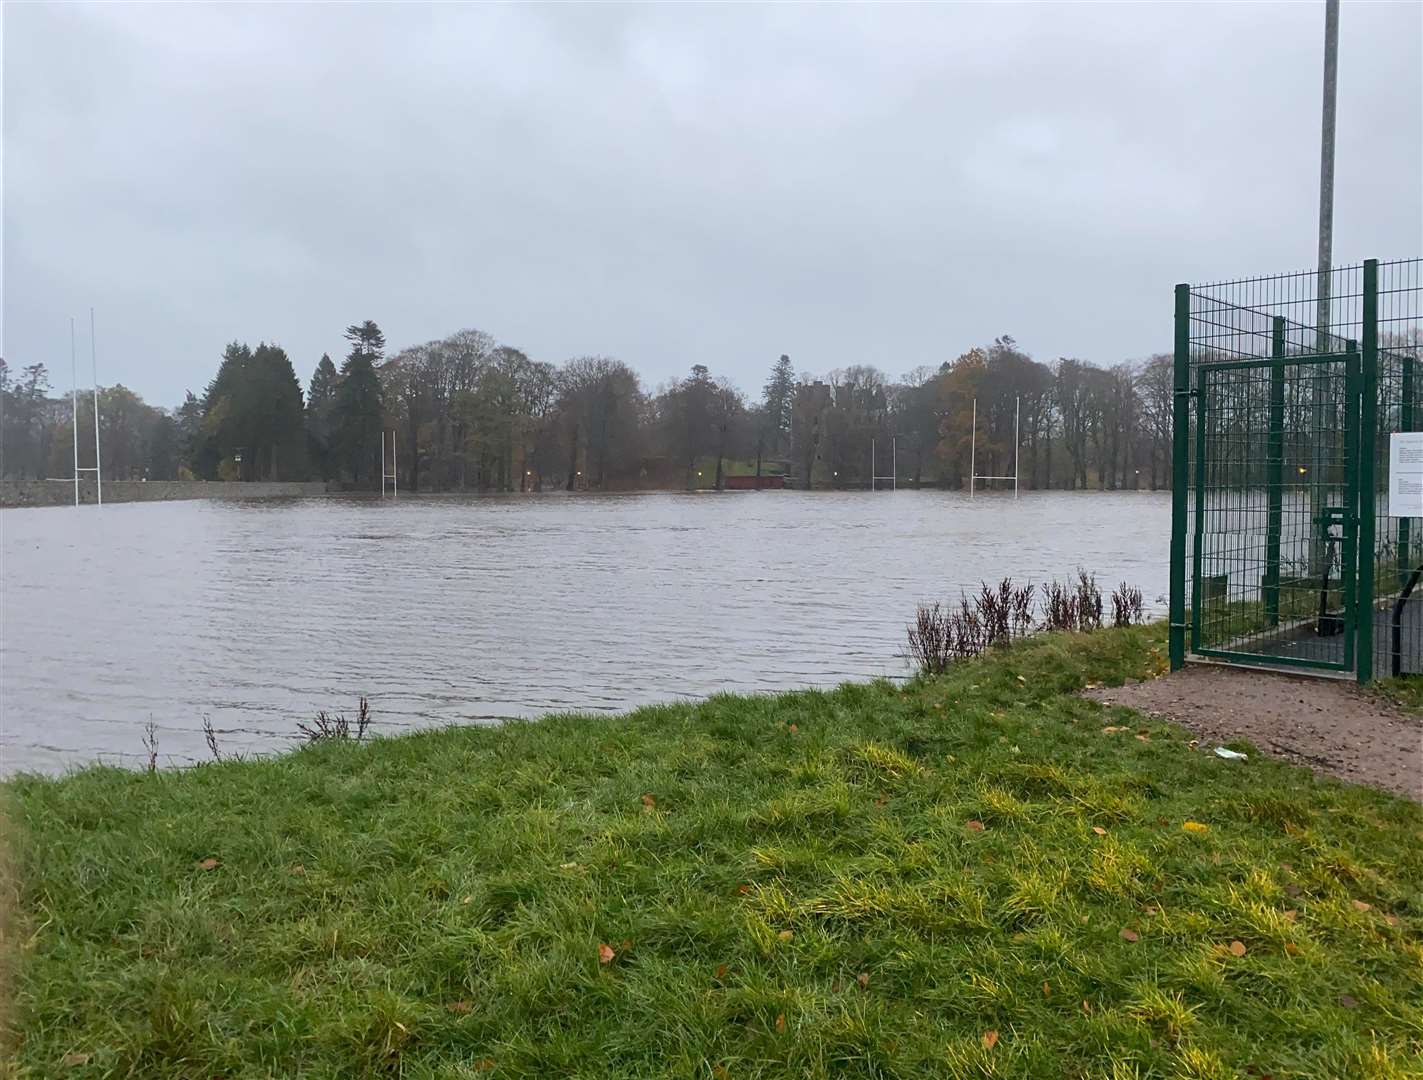 The playing fields have become a loch in the flooding at Huntly. Picture: Corey Combe.